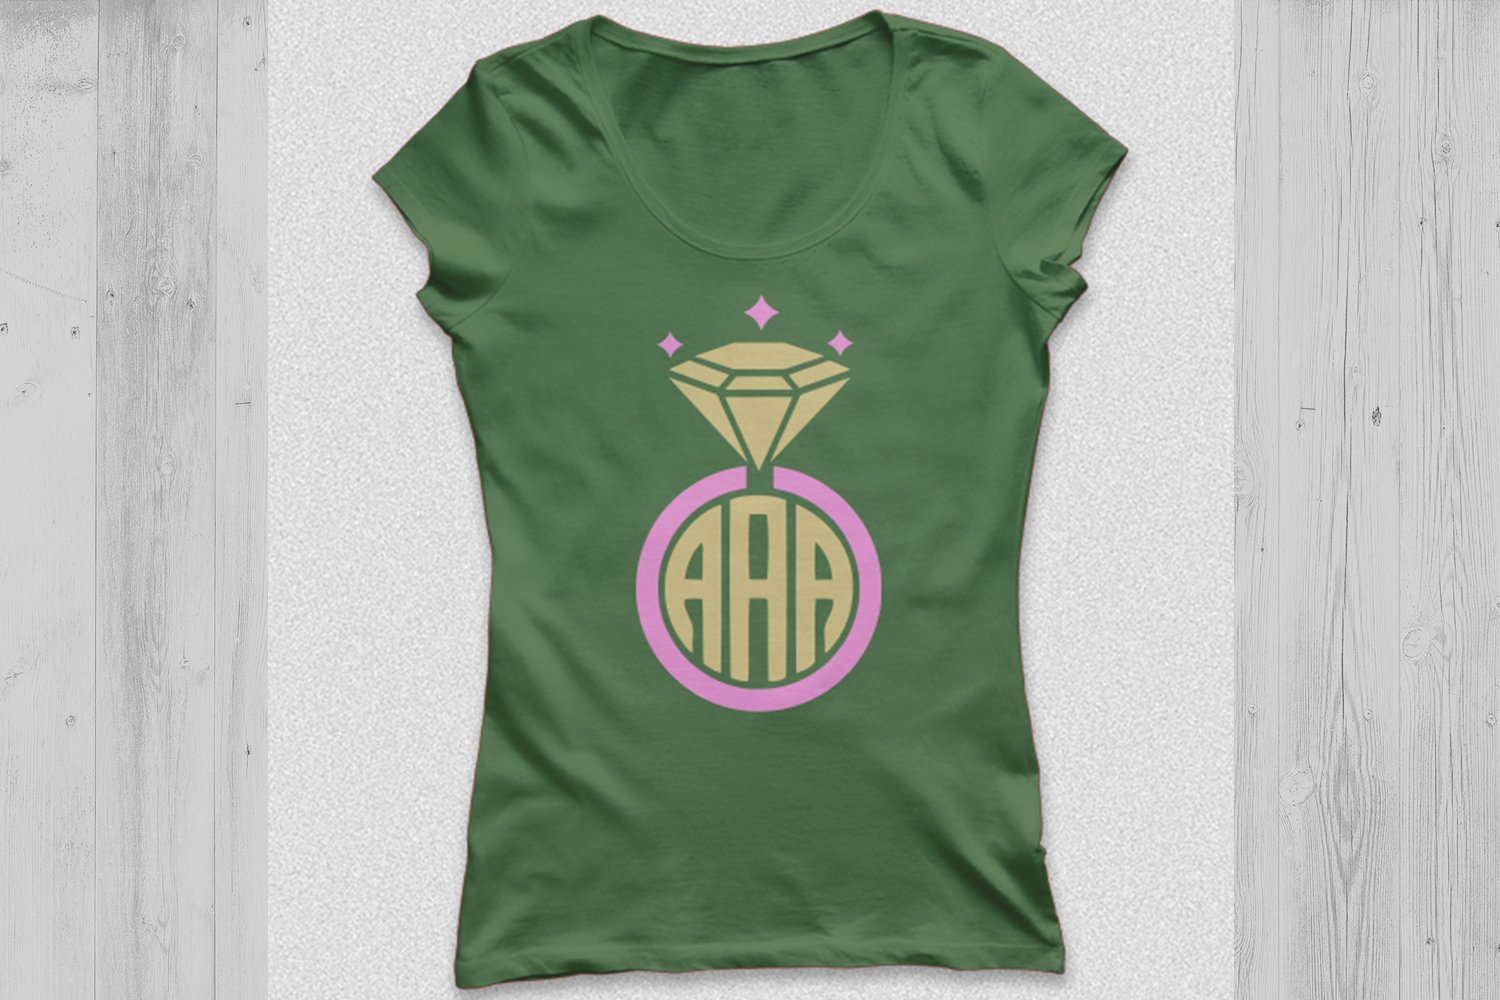 Green t-shirt with ring illustration.